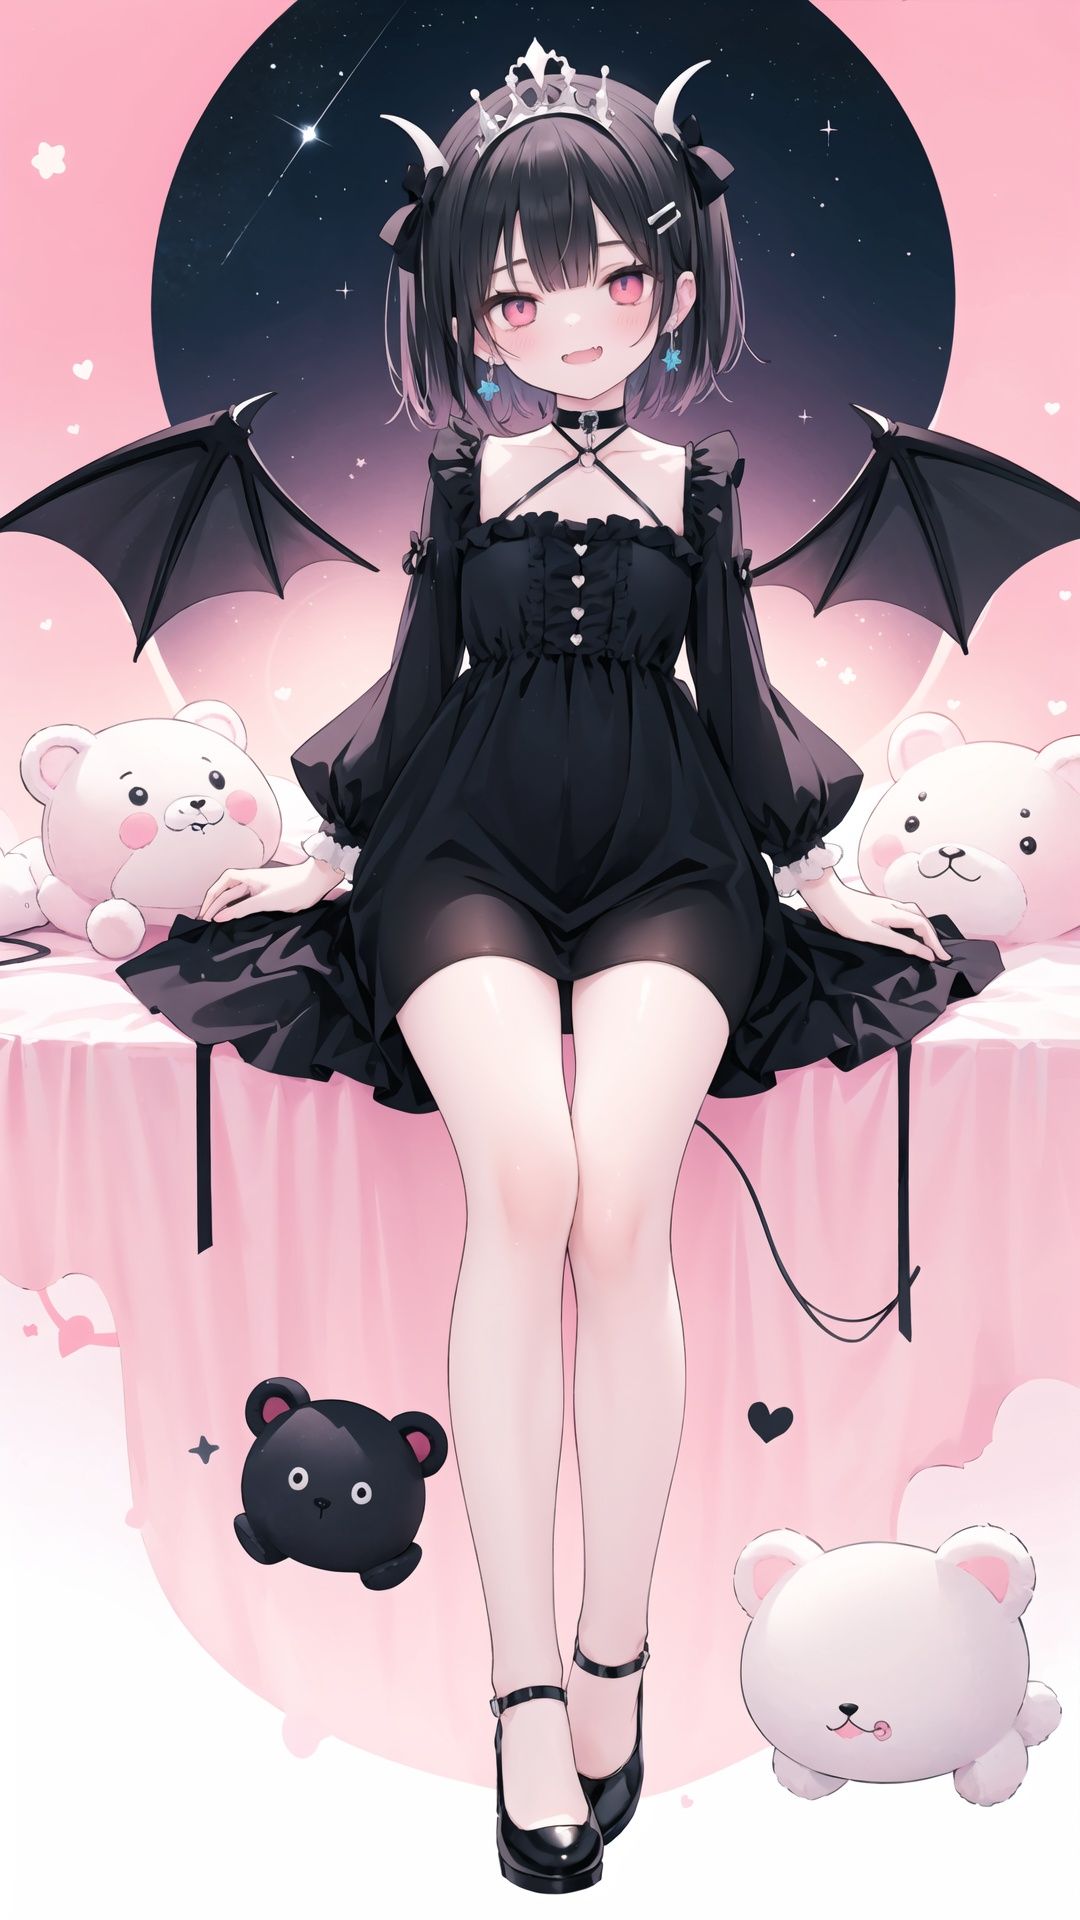 1girl,solo,watercolor,adorable,pink background,smiling,loli,demon girl,red eyes,short hair,black hair,horns,black horns,small wings,black wings,cute dress,frilly dress,black dress,knee-length dress,black and red dress,puff sleeves,round eyes,innocent expression,small fangs,black shoes,Mary Jane shoes,holding a plush toy,teddy bear plush toy,sitting on a cloud,floating,surrounded by stars,moon in the sky,stars in her hair,star-shaped earrings,striped stockings,black and white striped stockings,small tail,black tail,playing with fire,fire in her hands,magical aura,devilish grin,bat-shaped hairclip,tiara,black choker,red ribbon,heart-shaped necklace,mischievous look,small fangs,blush on cheeks,pointy ears,small and delicate hands,fair skin,